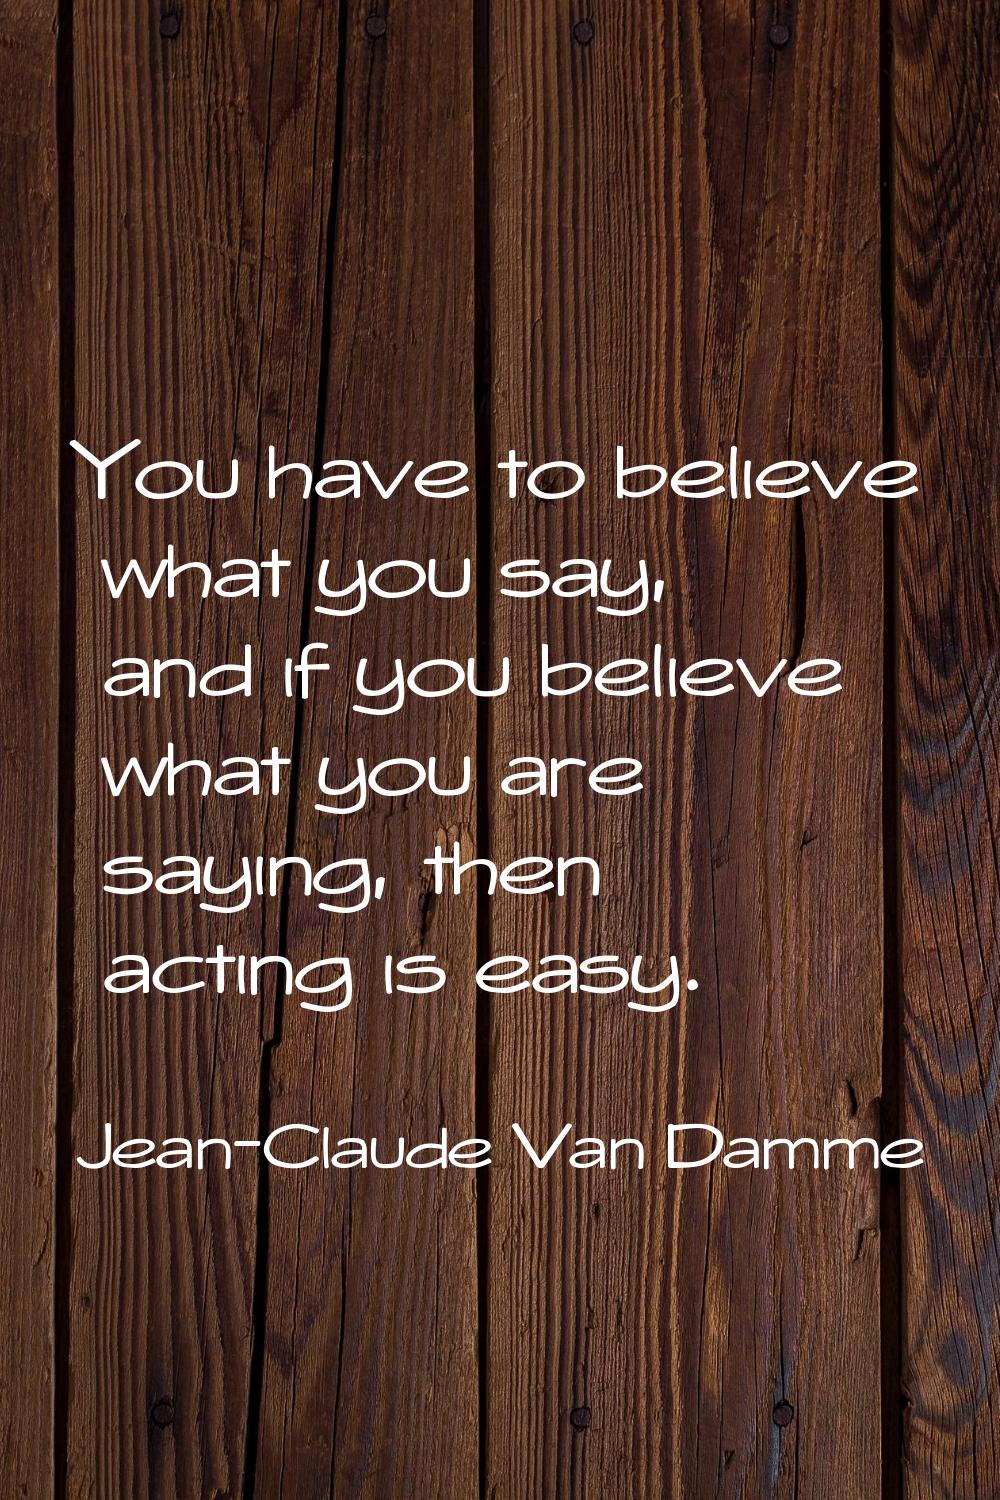 You have to believe what you say, and if you believe what you are saying, then acting is easy.